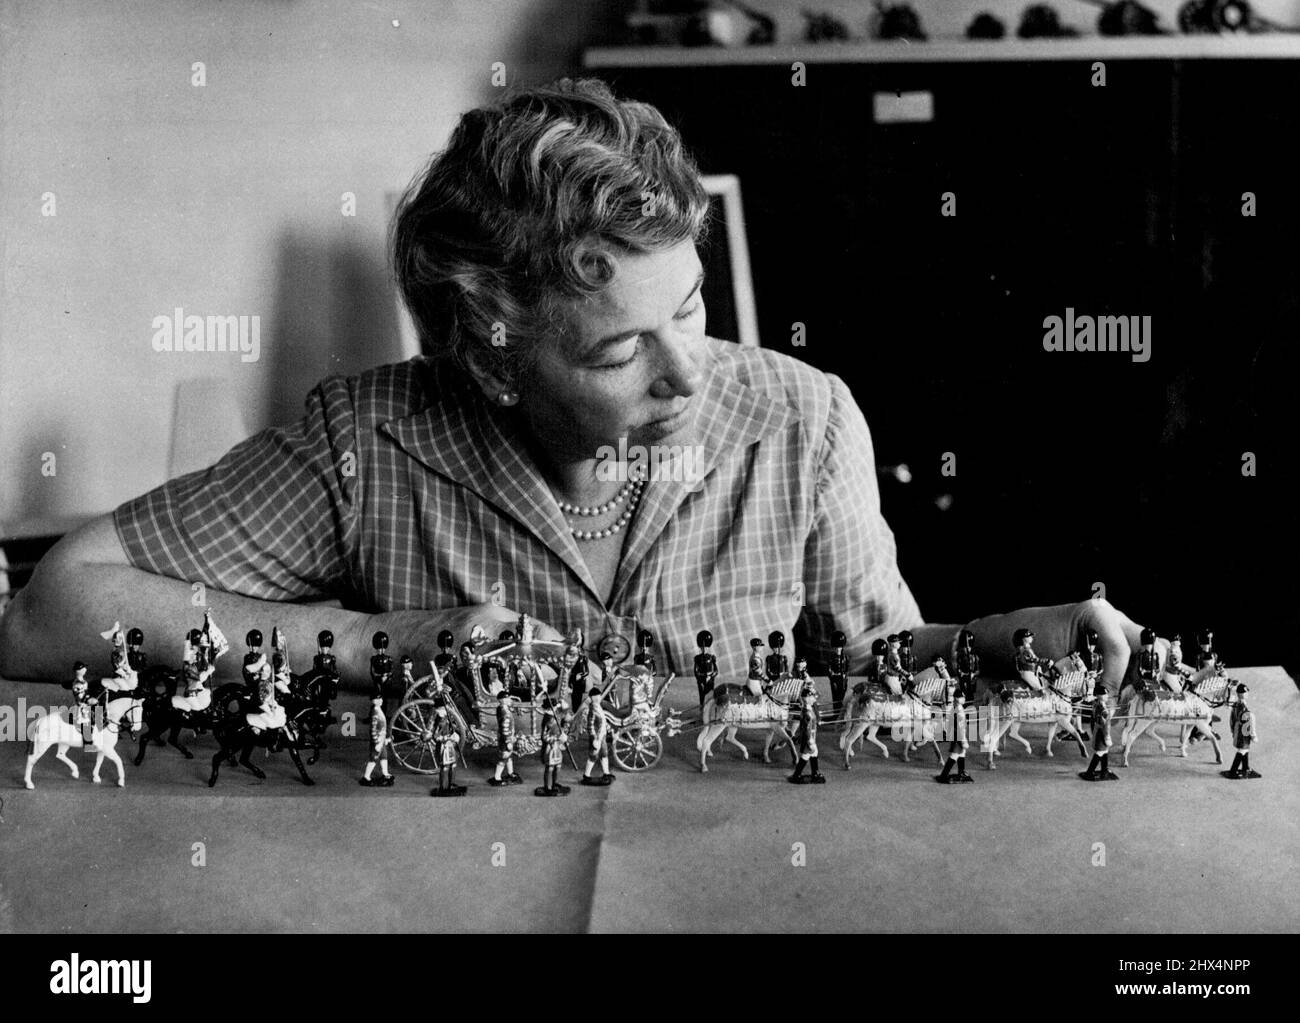 The Coronation Procession in Miniature: Mrs. D.K. Kingswill, of Muswell Hill, photographed arranging the Royal Coach and escort in the miniature Coronation Procession. Makers of toy soldiers and animals, Britains Ltd., have an interesting display which represents the Coronation Procession, complete with Royal Coach and escorting troops. August 27, 1952. (Photo by Fox Photos). Stock Photo